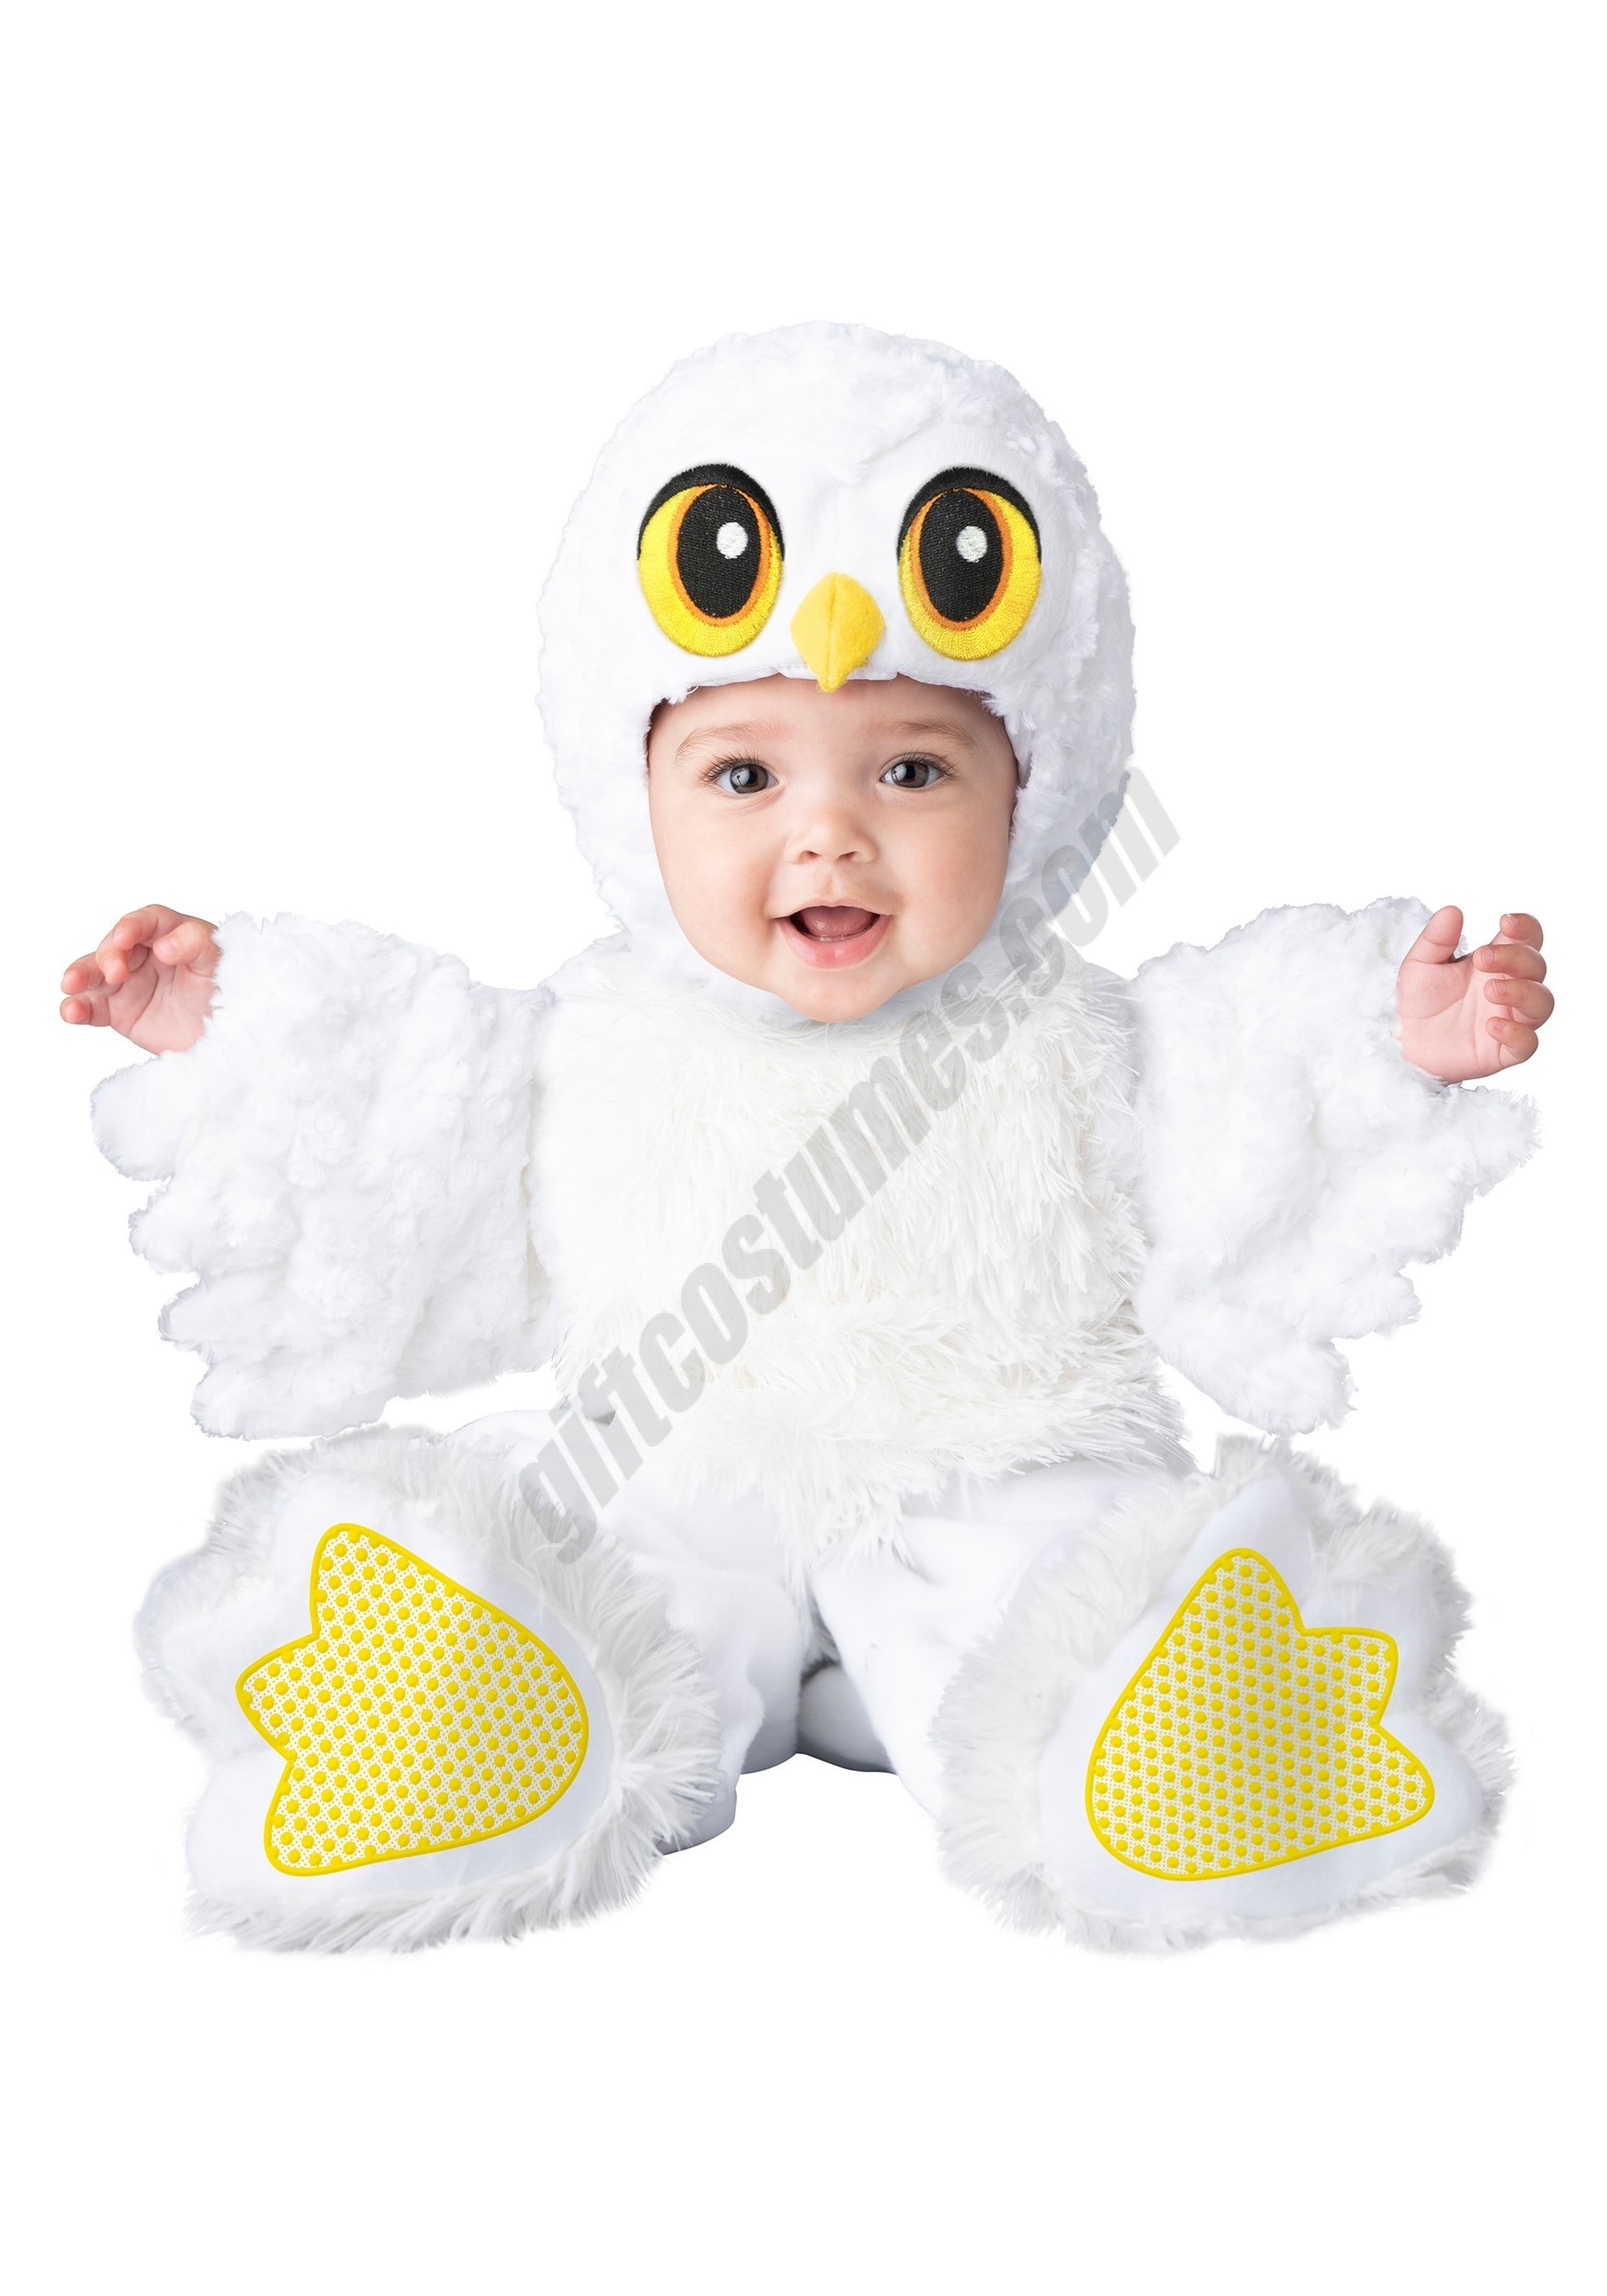 Infant Silly Snow Owl Costume Promotions - Infant Silly Snow Owl Costume Promotions